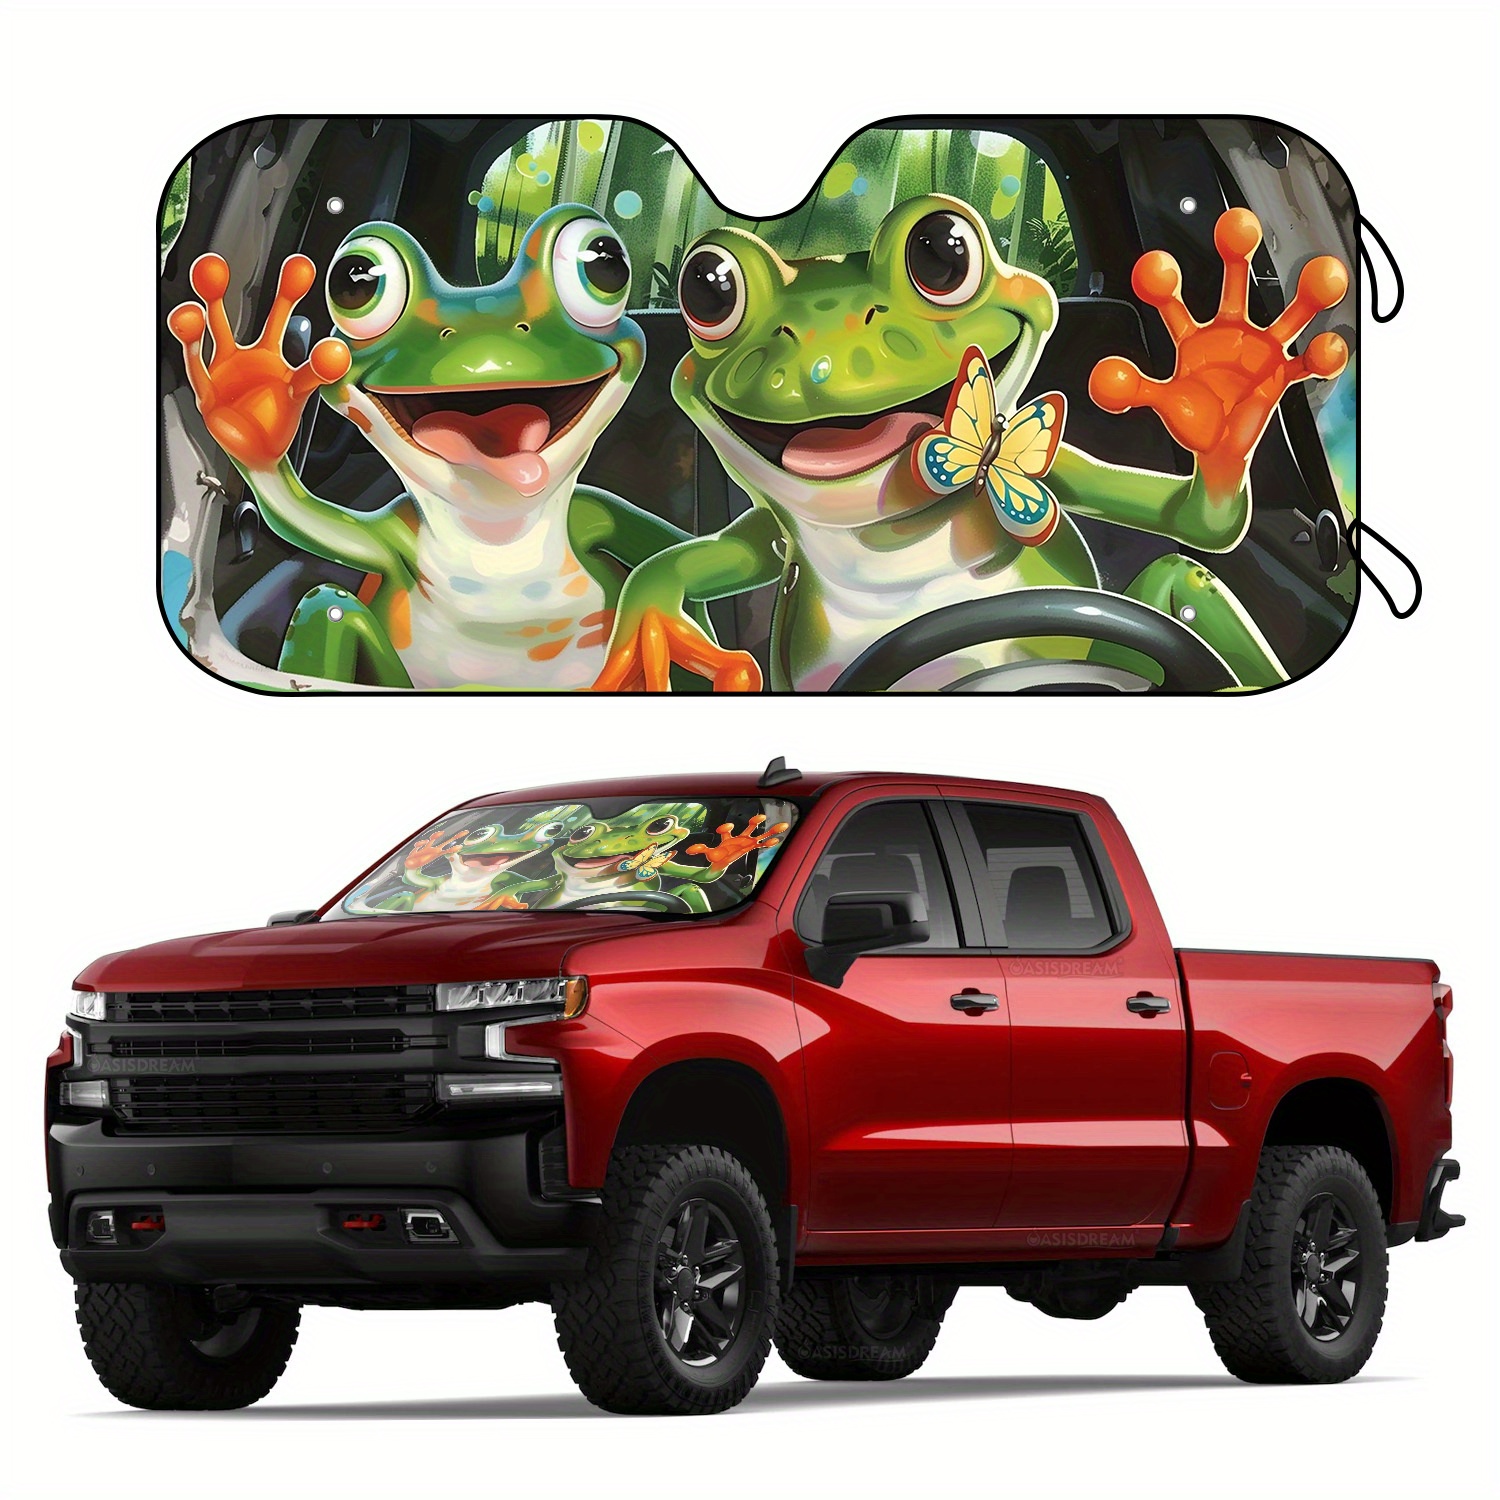 

Rv Windshield Sunshade With 2 Frogs Print - Foldable Sunshade For Suv, Truck With Uv Protection, Includes 4 Suction Cups - Major Material Other - 1pc